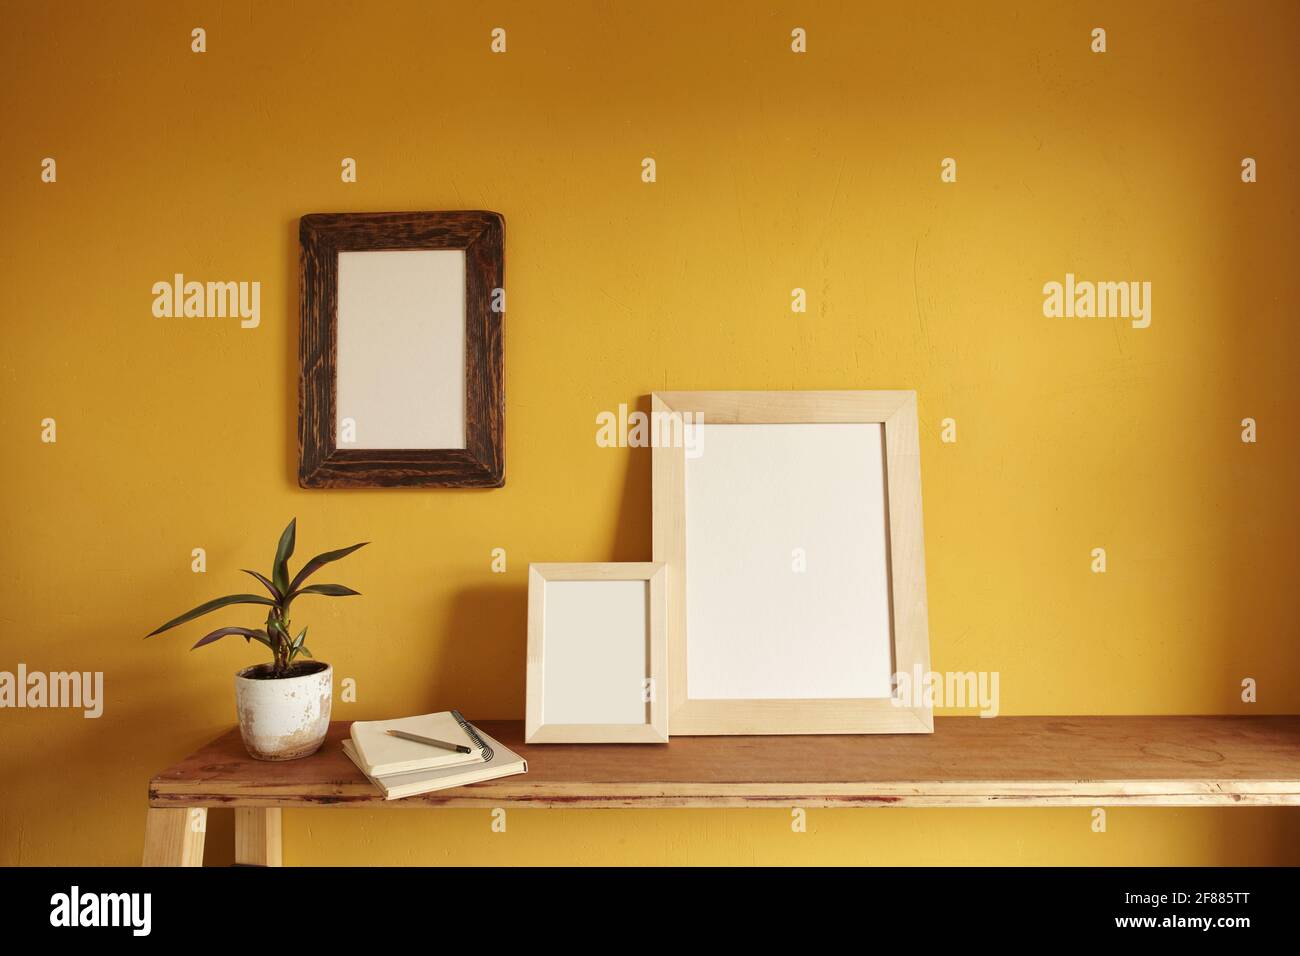 Wooden frames mockup. Flowerpot on a pile of books on an old wooden shelf. Composition on a yellow wall background Stock Photo